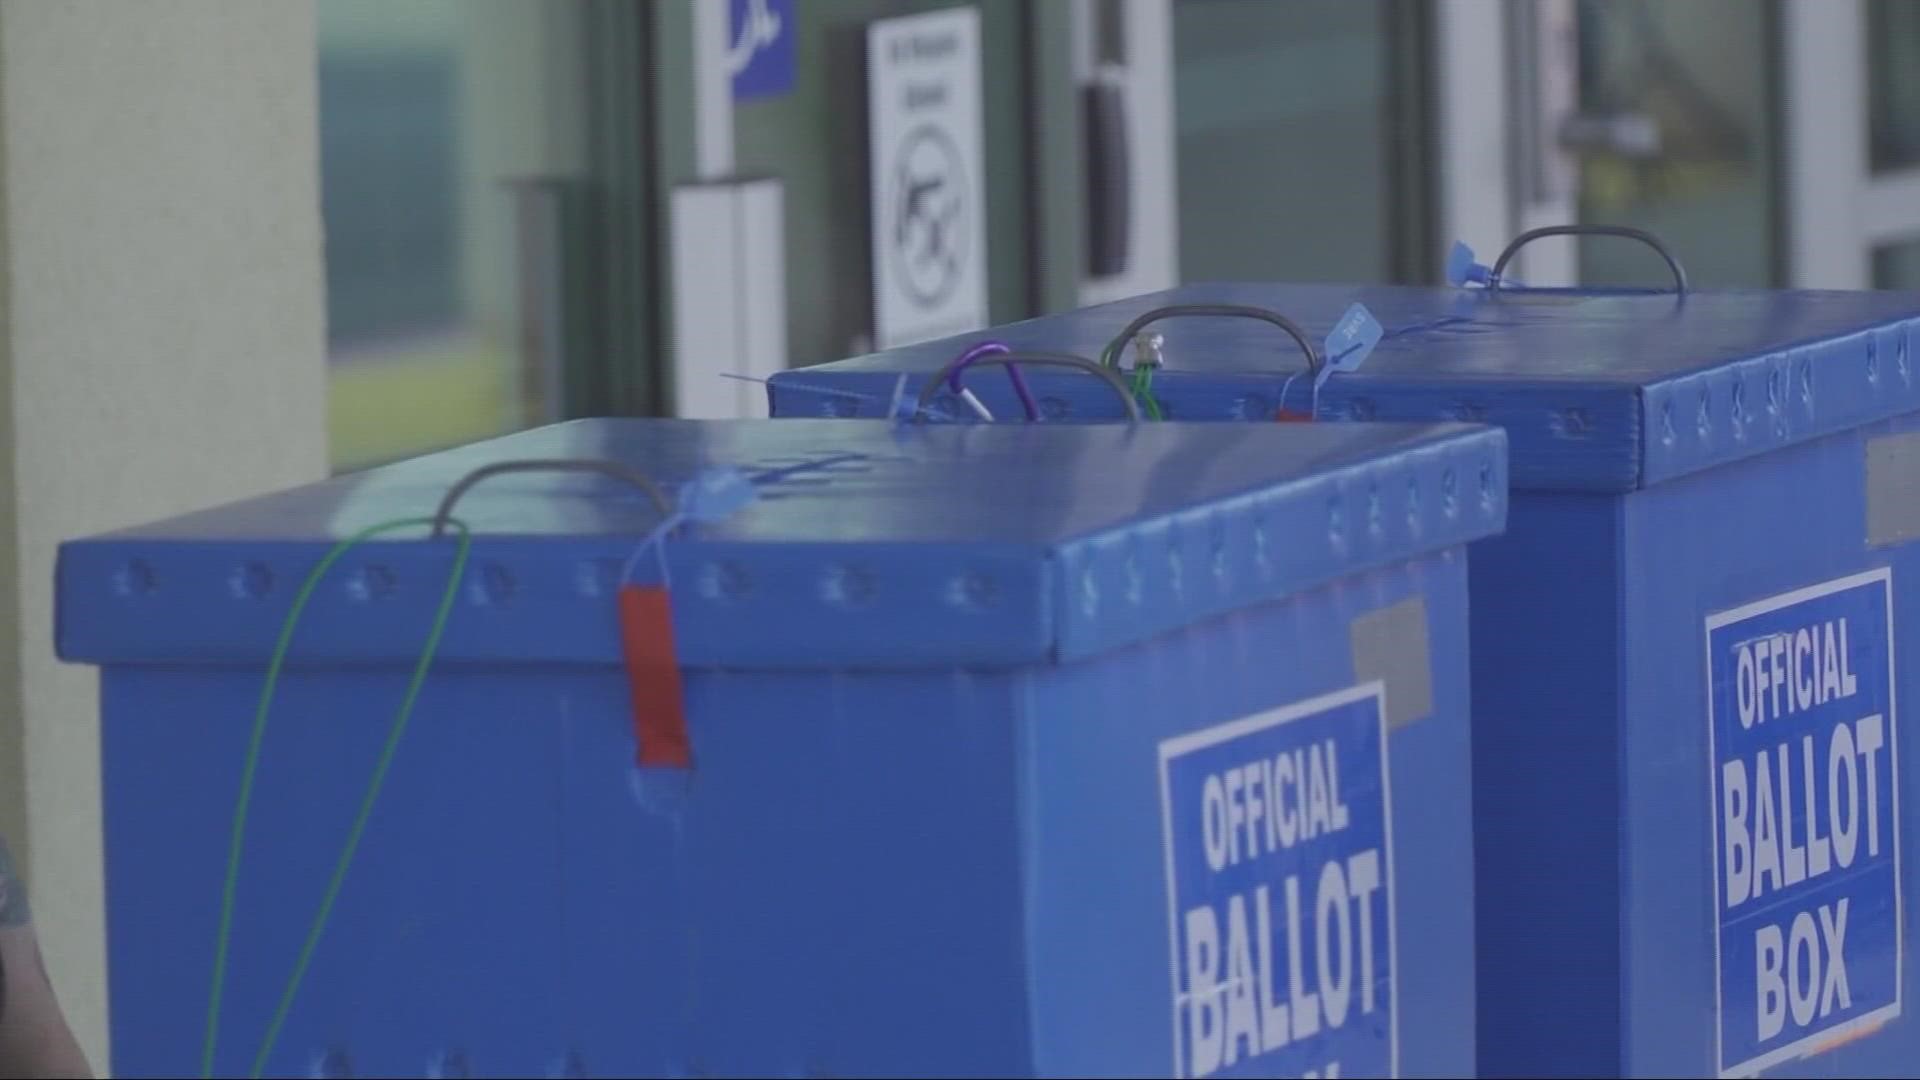 Today is the day - Primary Elections, but how motivated are voters? ABC10's Walt Gray tells us what we need to know.